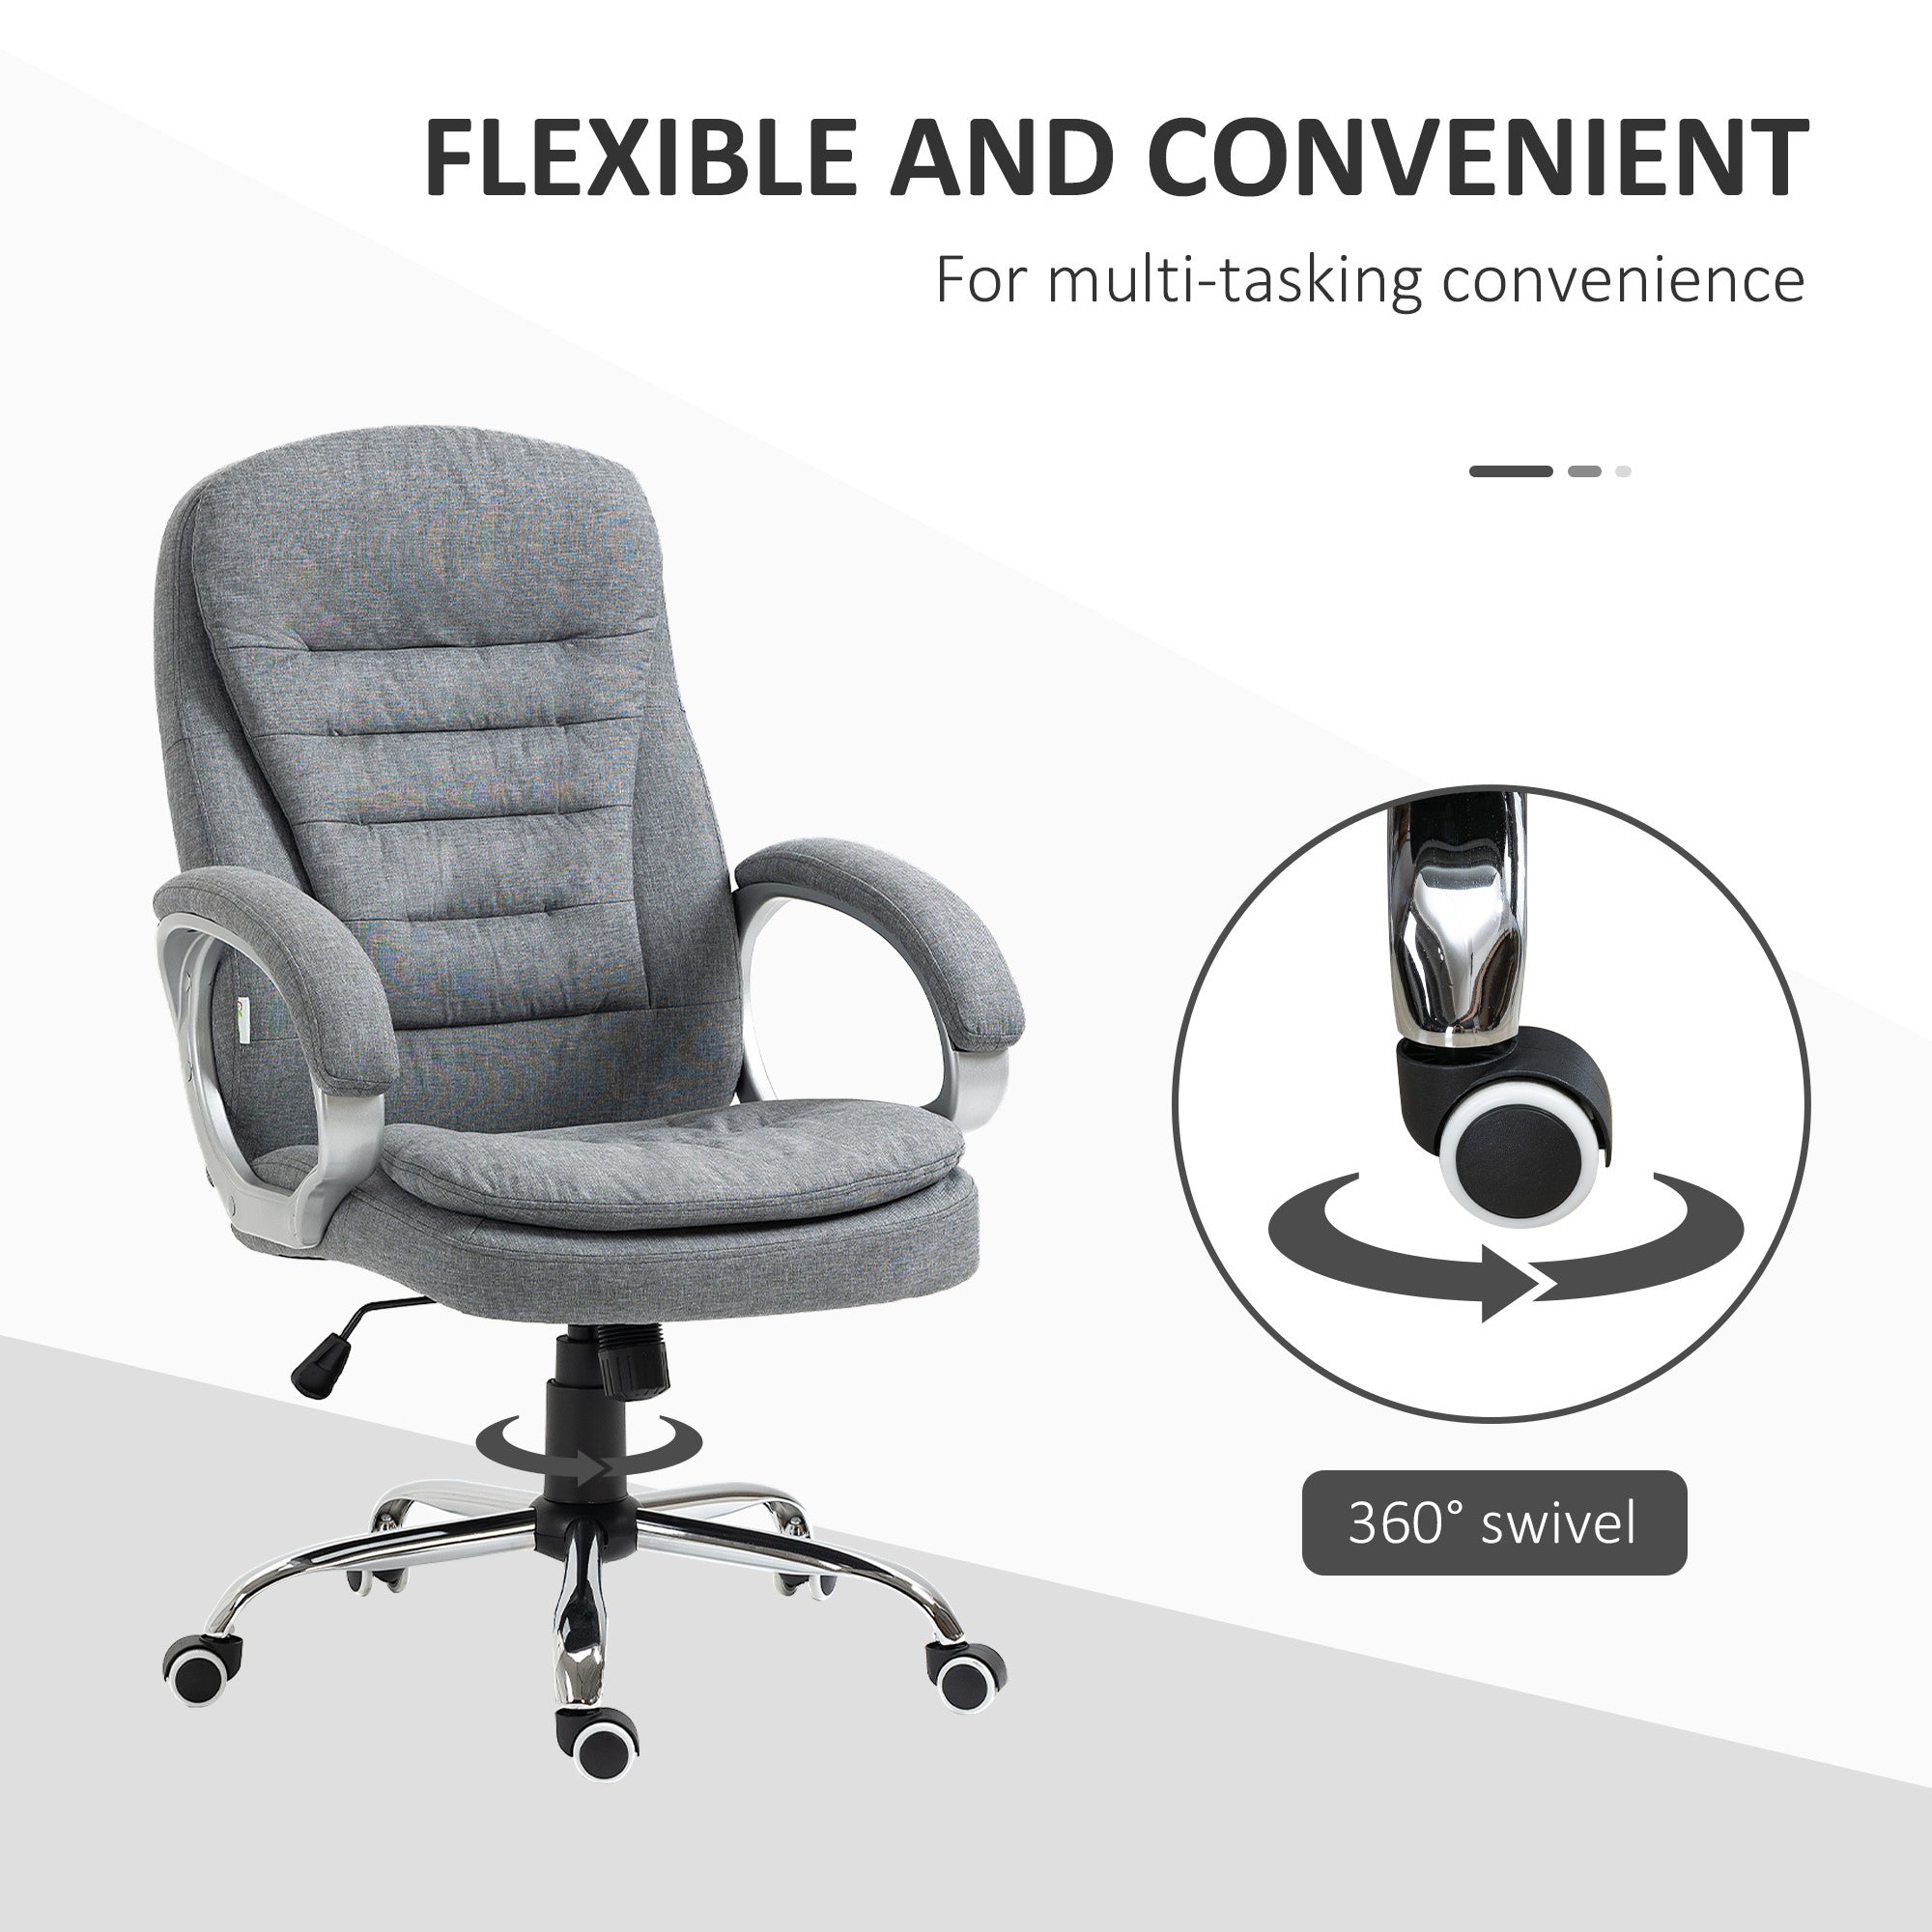 High Back Home Office Chair with Adjustable Height - Grey